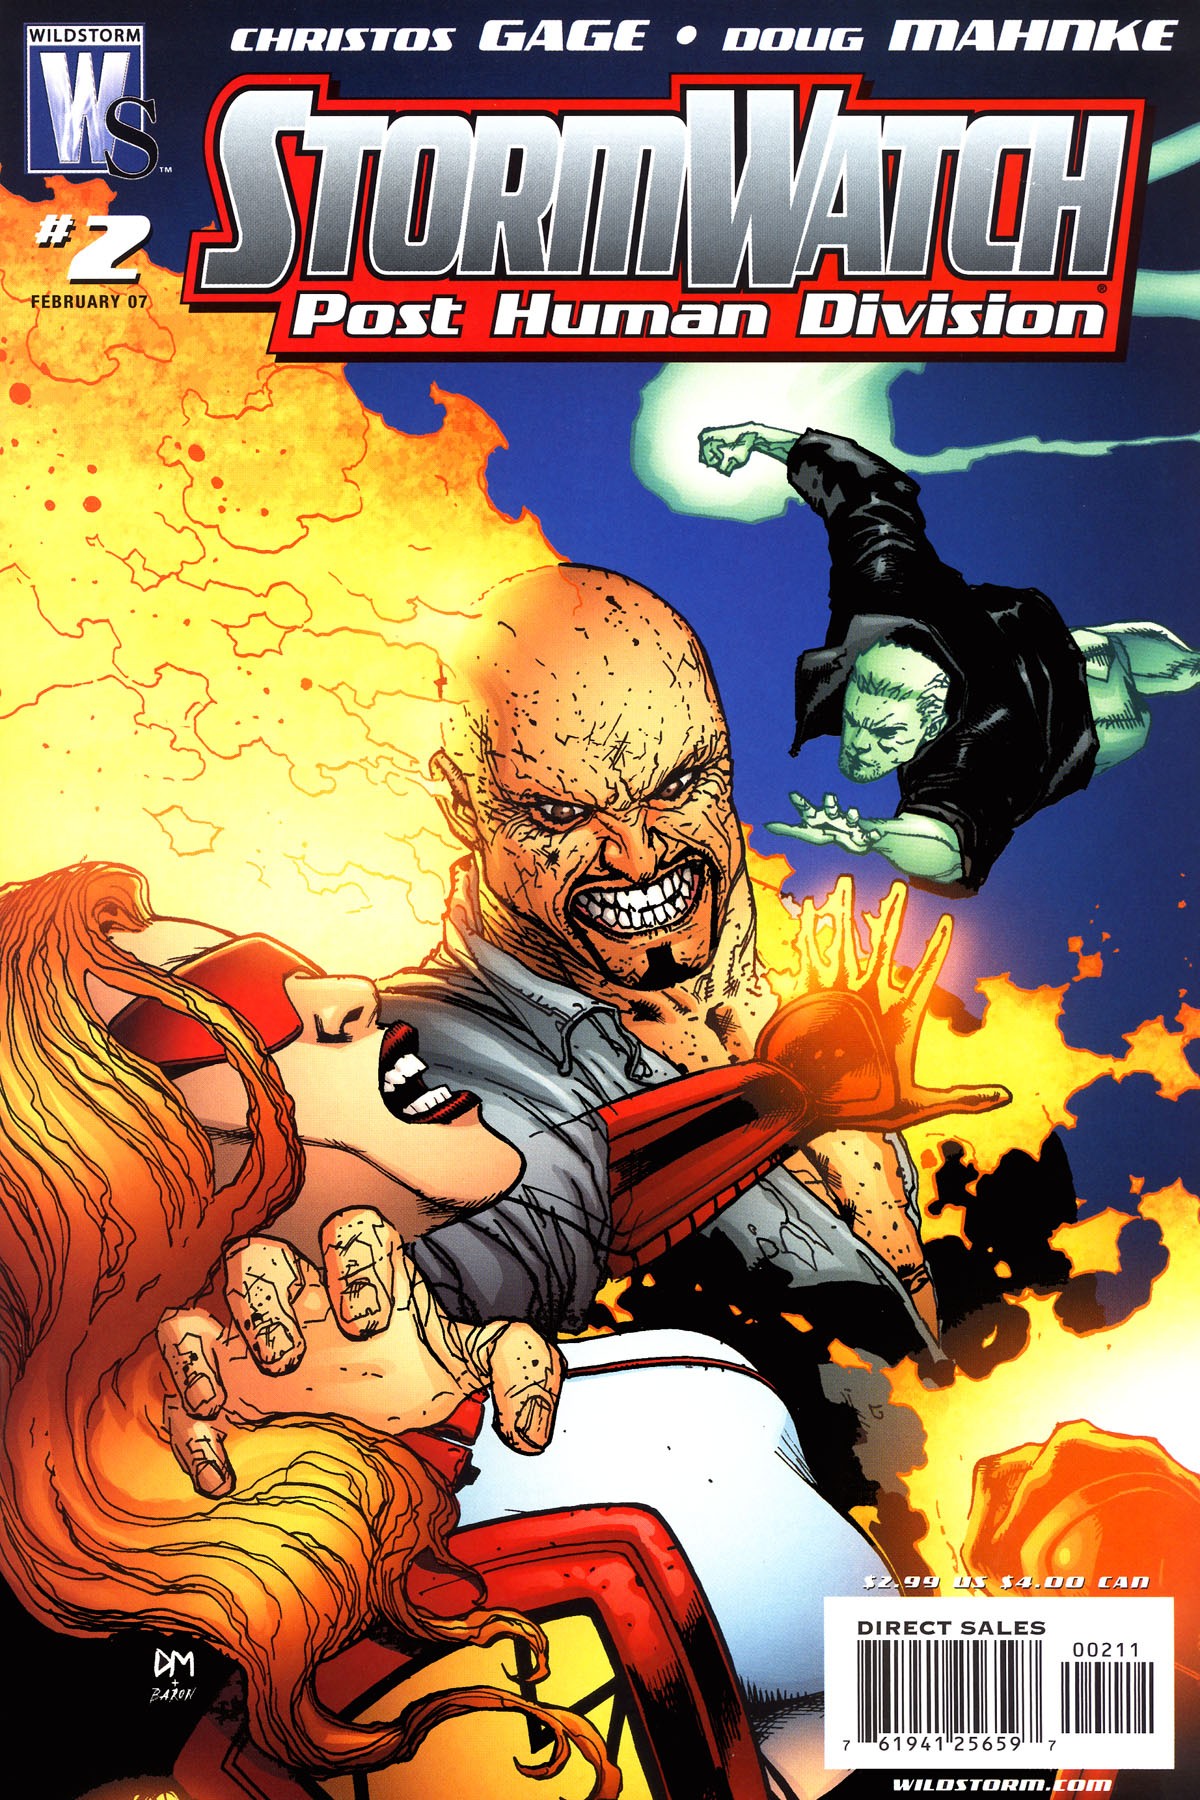 Stormwatch: Post Human Division Vol. 1 #2